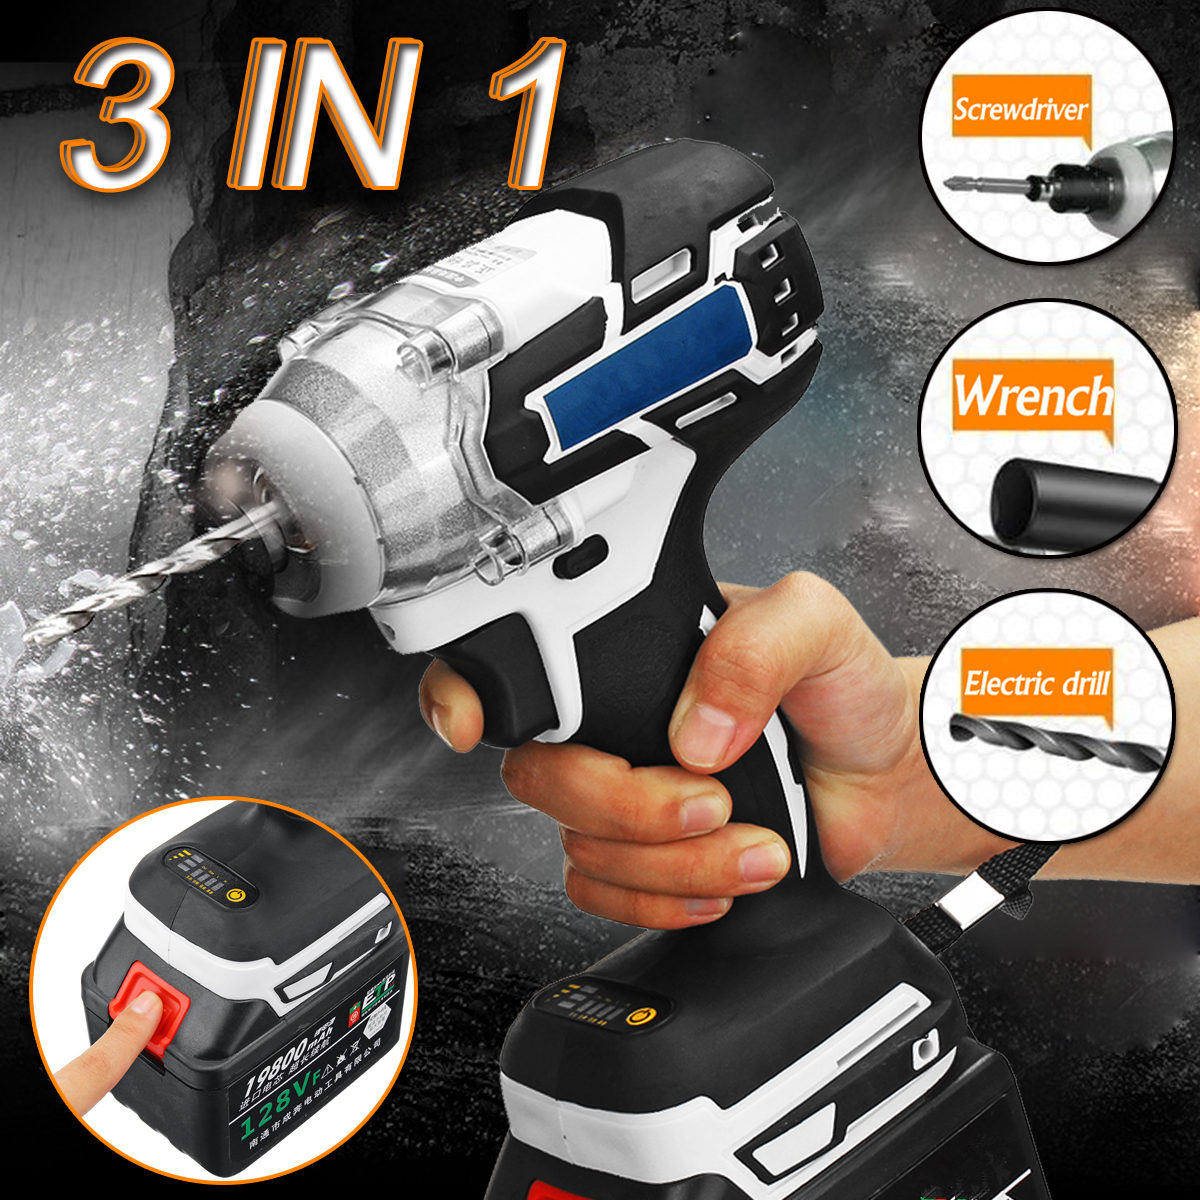 3 In 1 128VF 19800mAH Brushless Electric Wrench Power Drill Electric Screwdriver 240-520NM Adjustable Stepless Speed Regulation